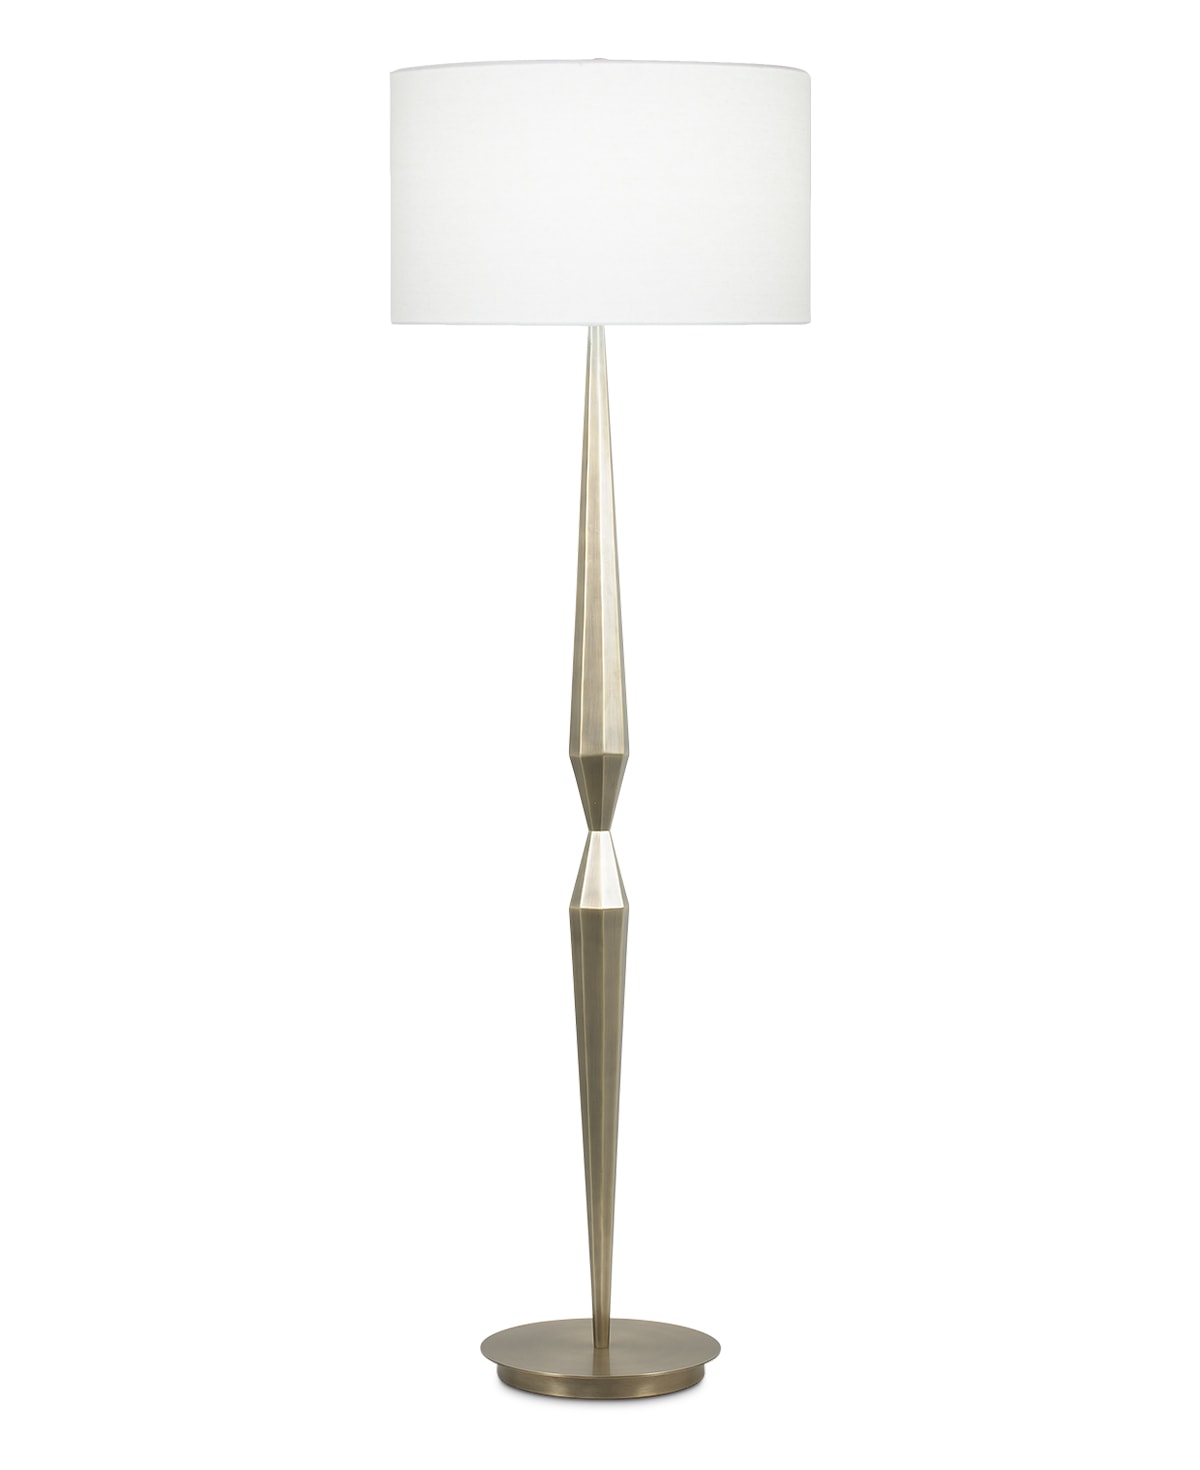 FlowDecor Martin Floor Lamp in metal with antique brass finish and off-white linen drum shade (# 3828)